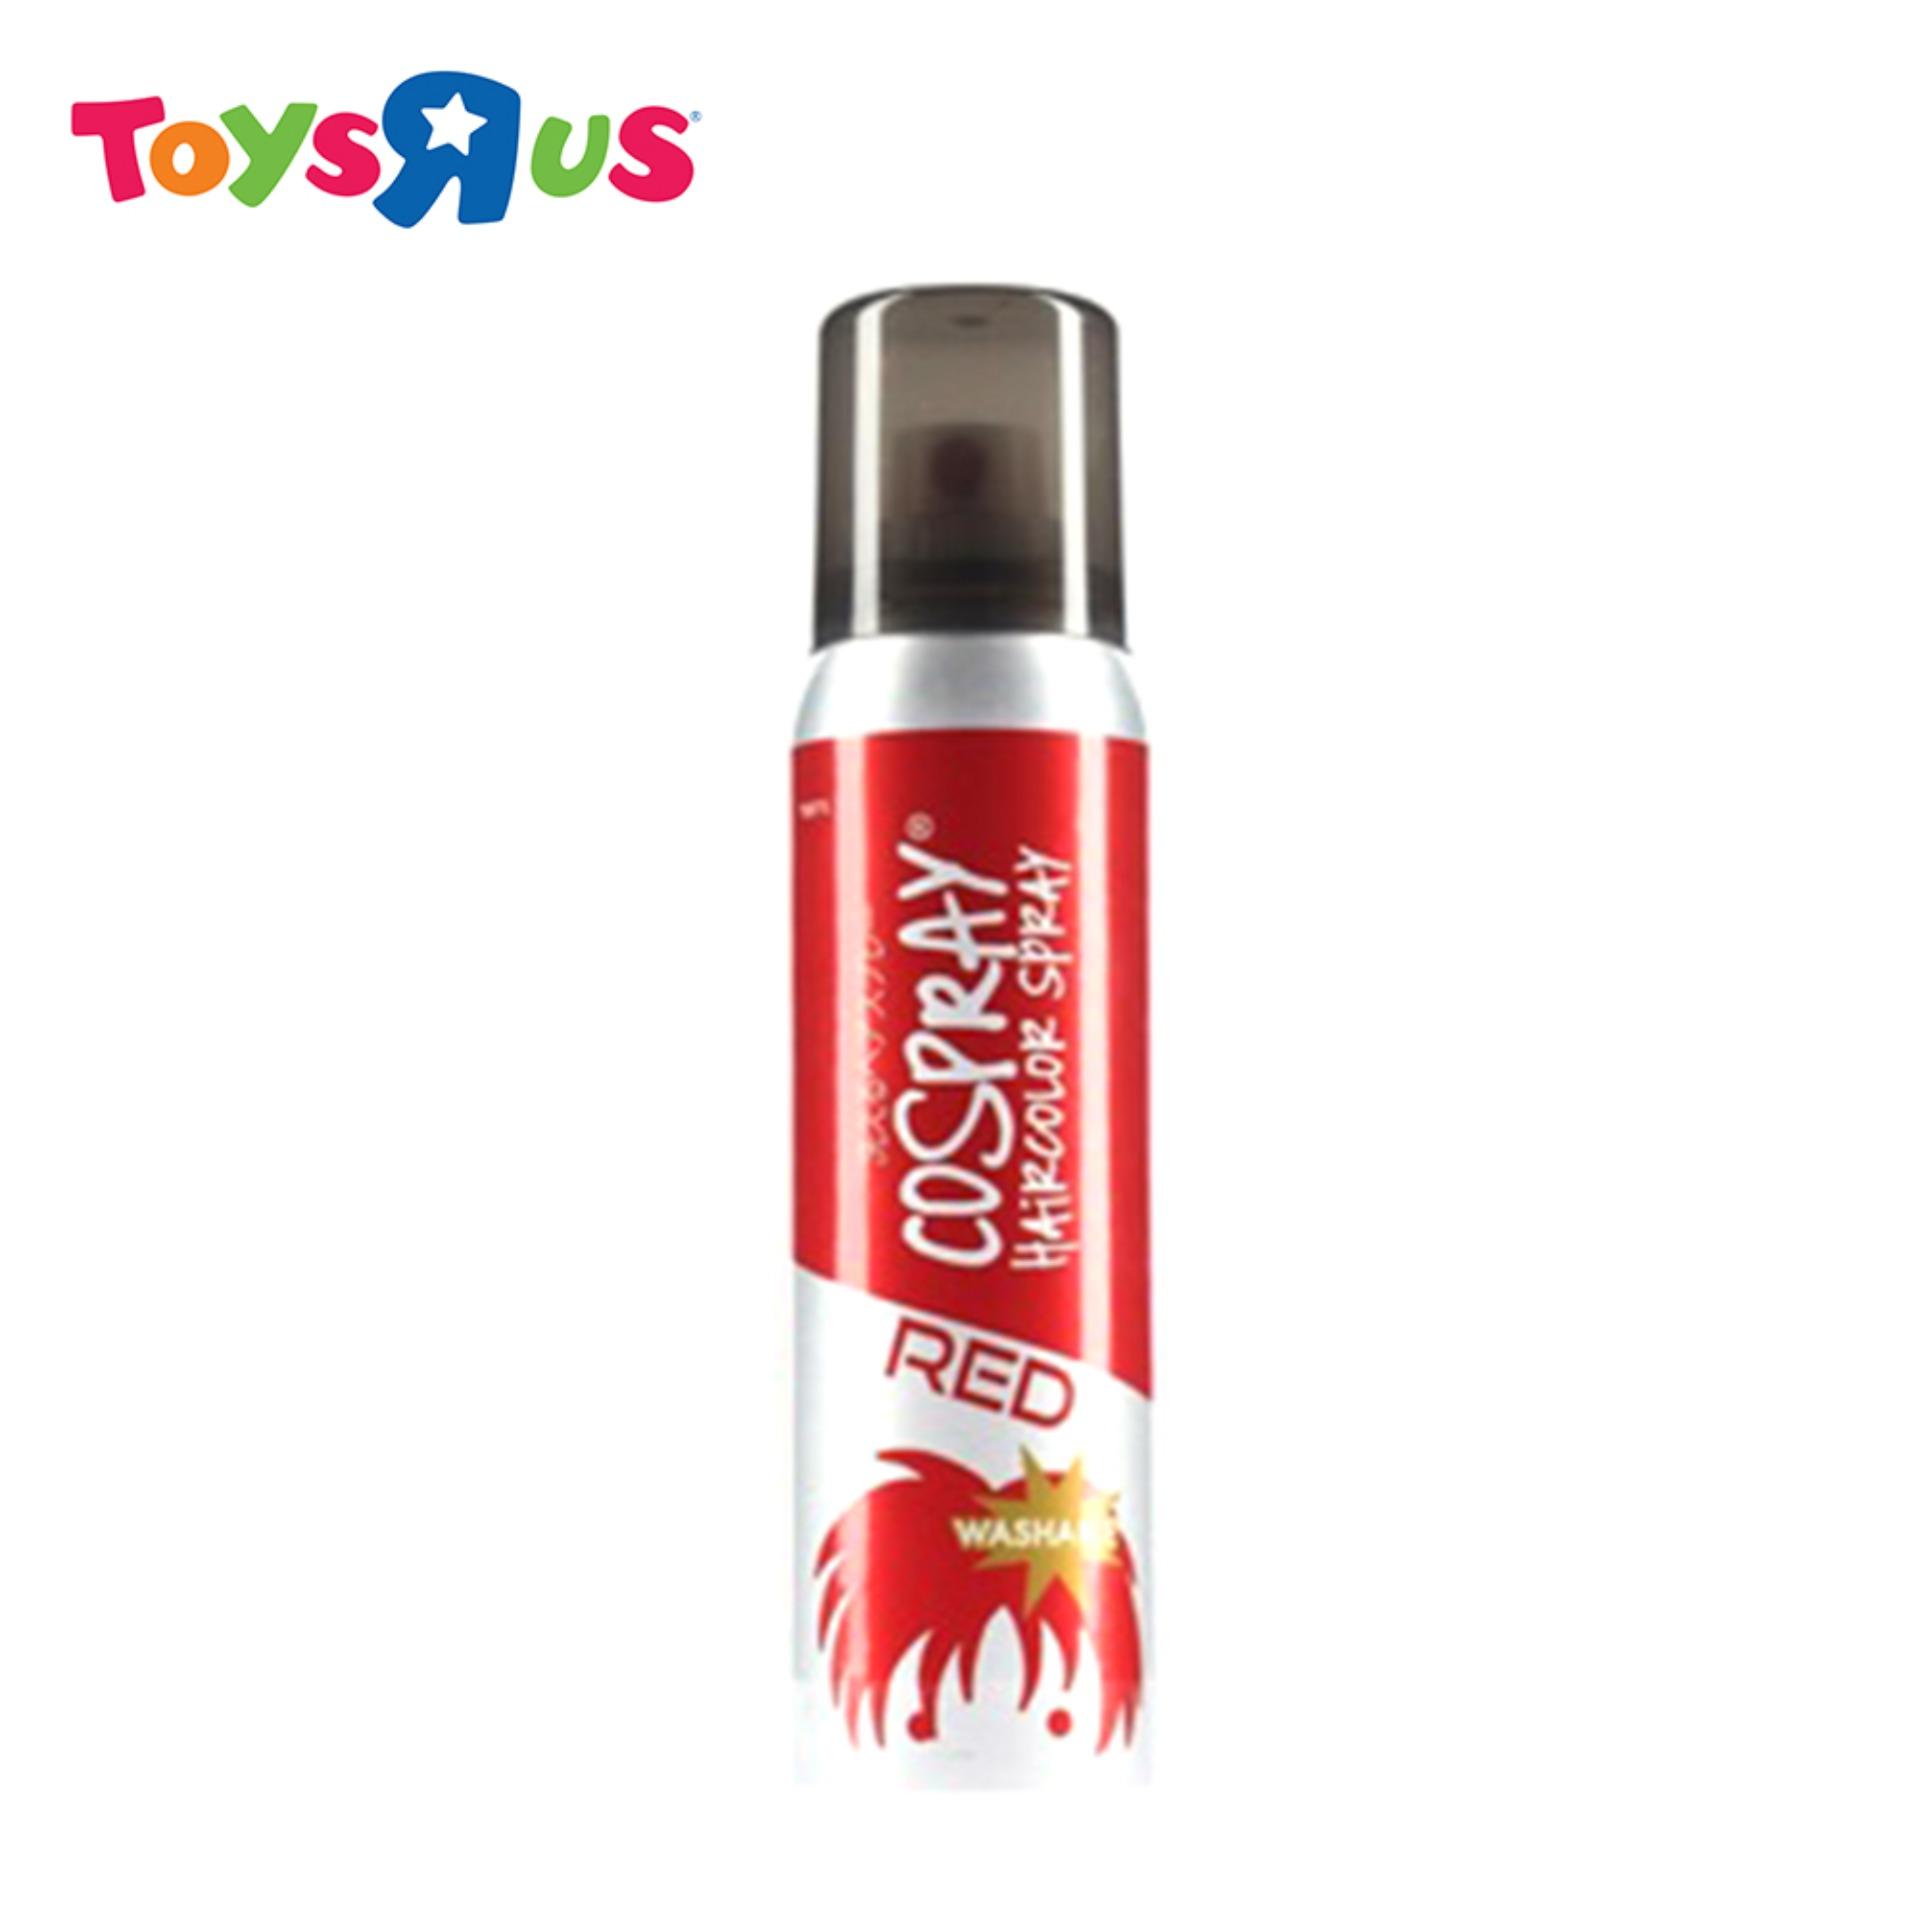 Cospray Washable Hair Color Spray (Red) | Toys R Us